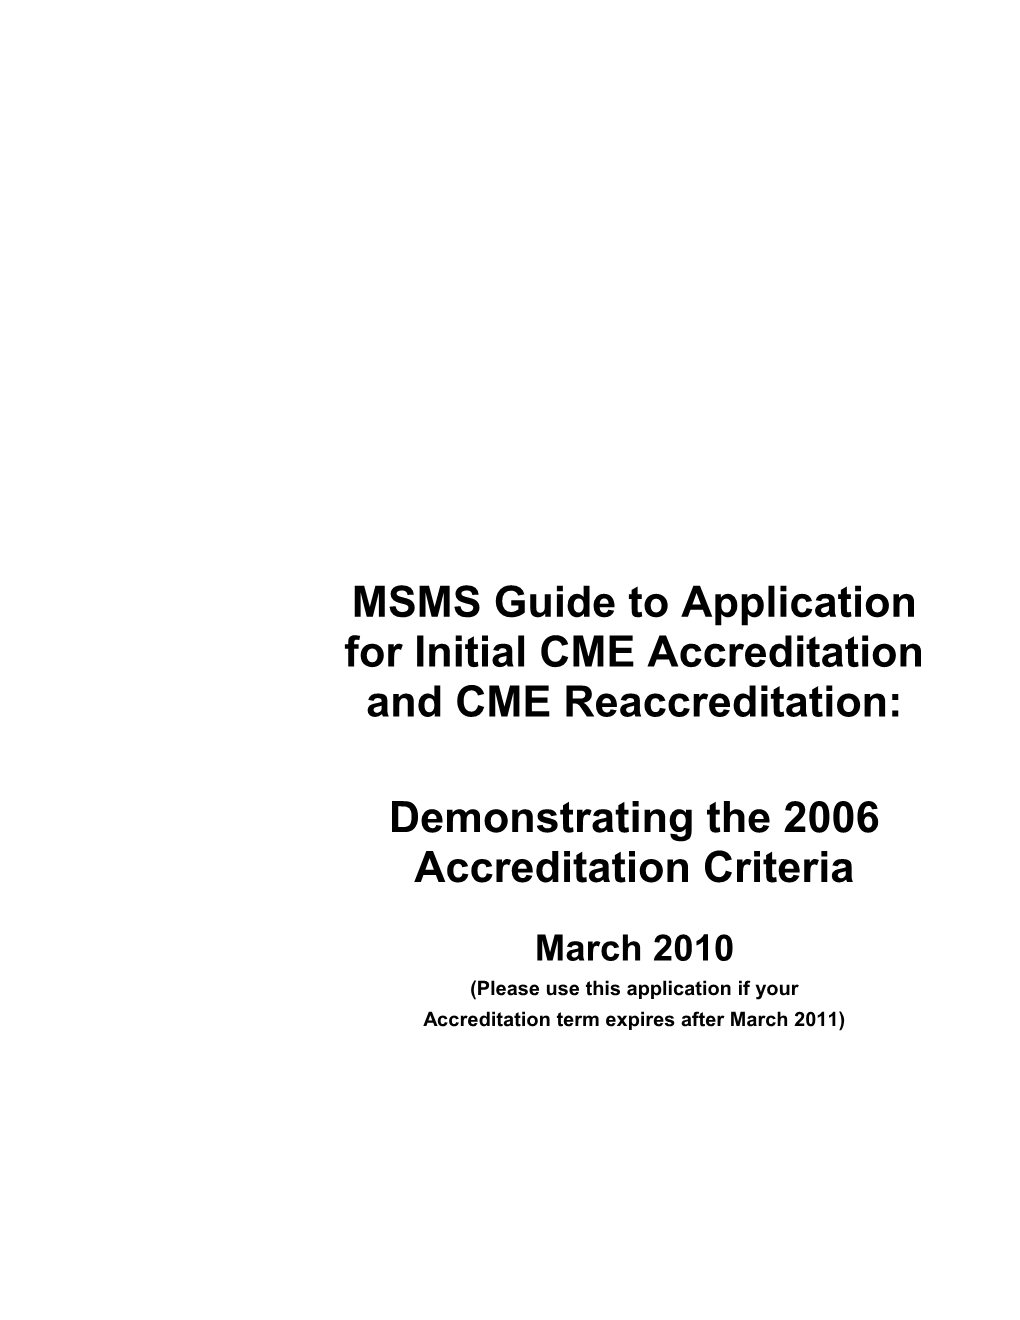 MSMS Guide to Application for Initial CME Accreditation and CME Reaccreditation